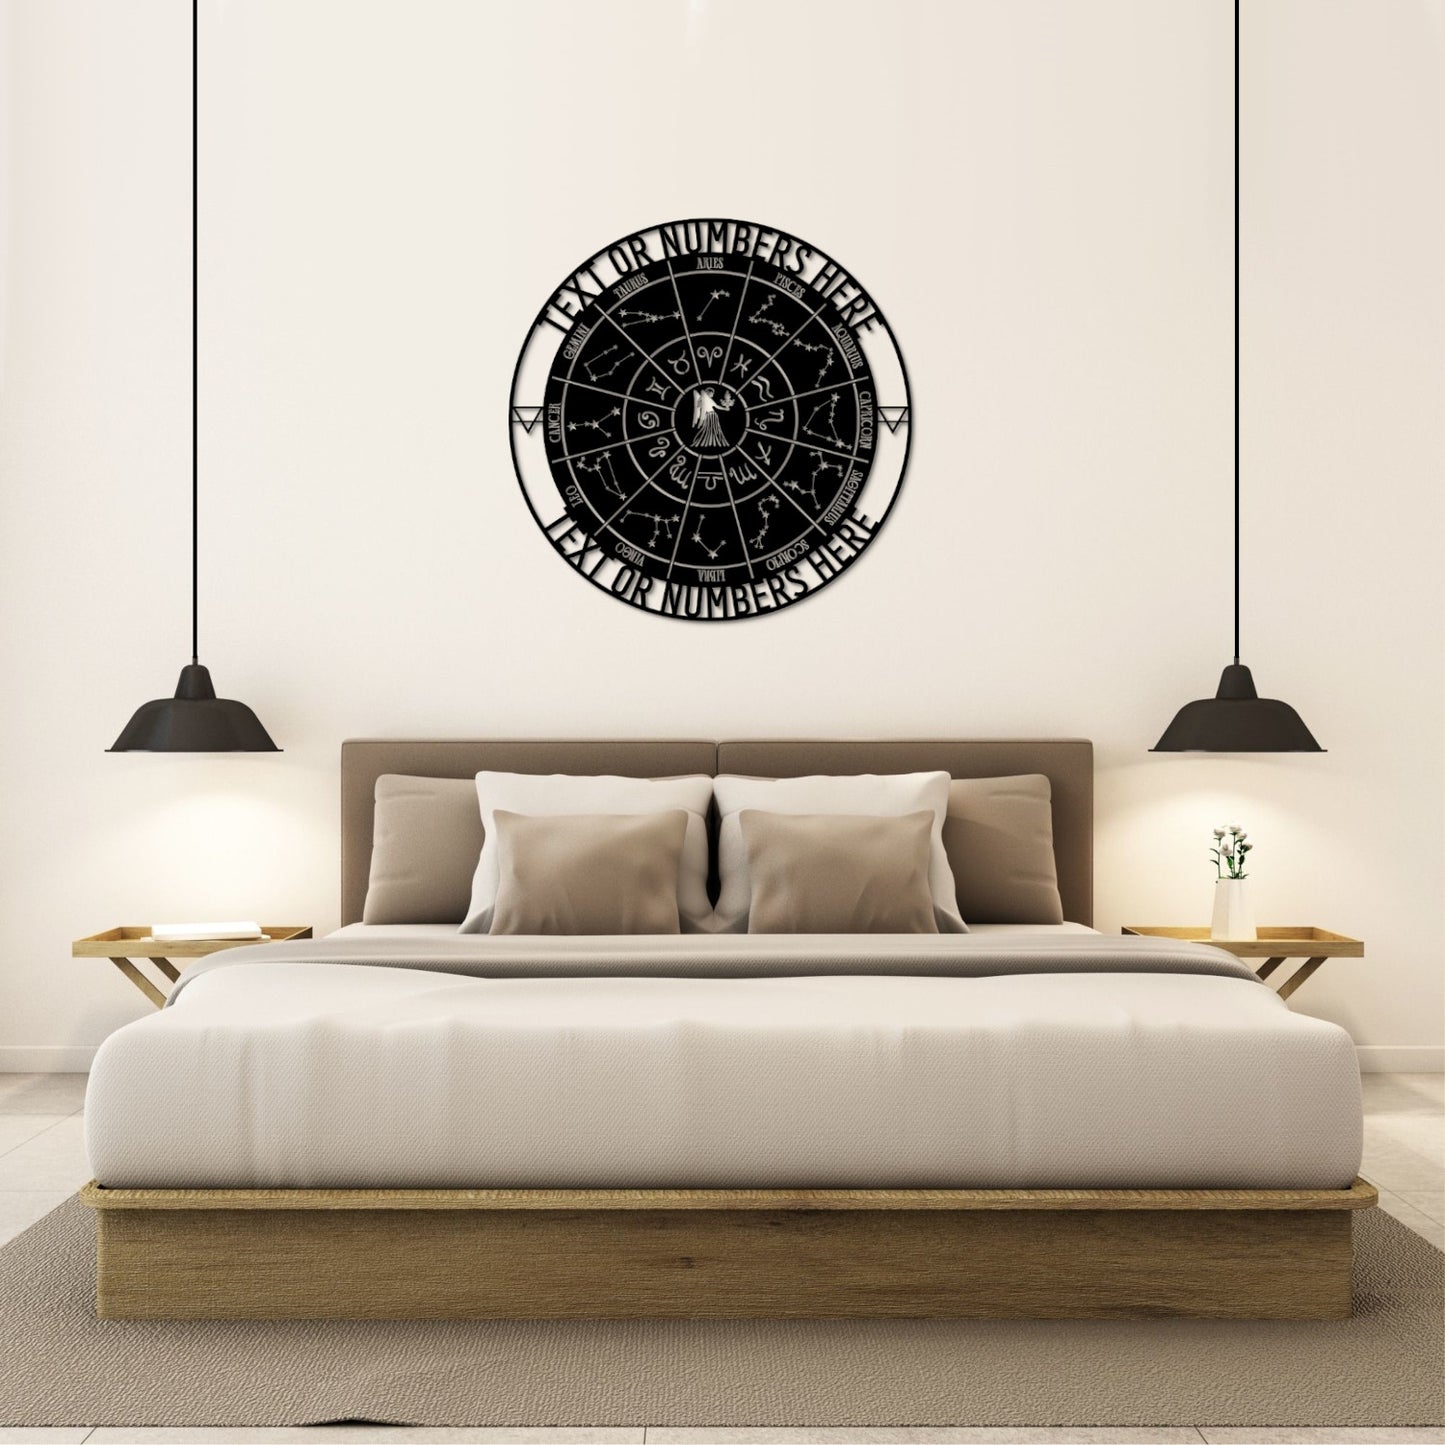 Personalized Virgo Zodiac Wheel Name Metal Sign Gift. Custom Made Astrology Wall Decor. Celestial Gifts. Decorative Virgo Star Sign Hanging